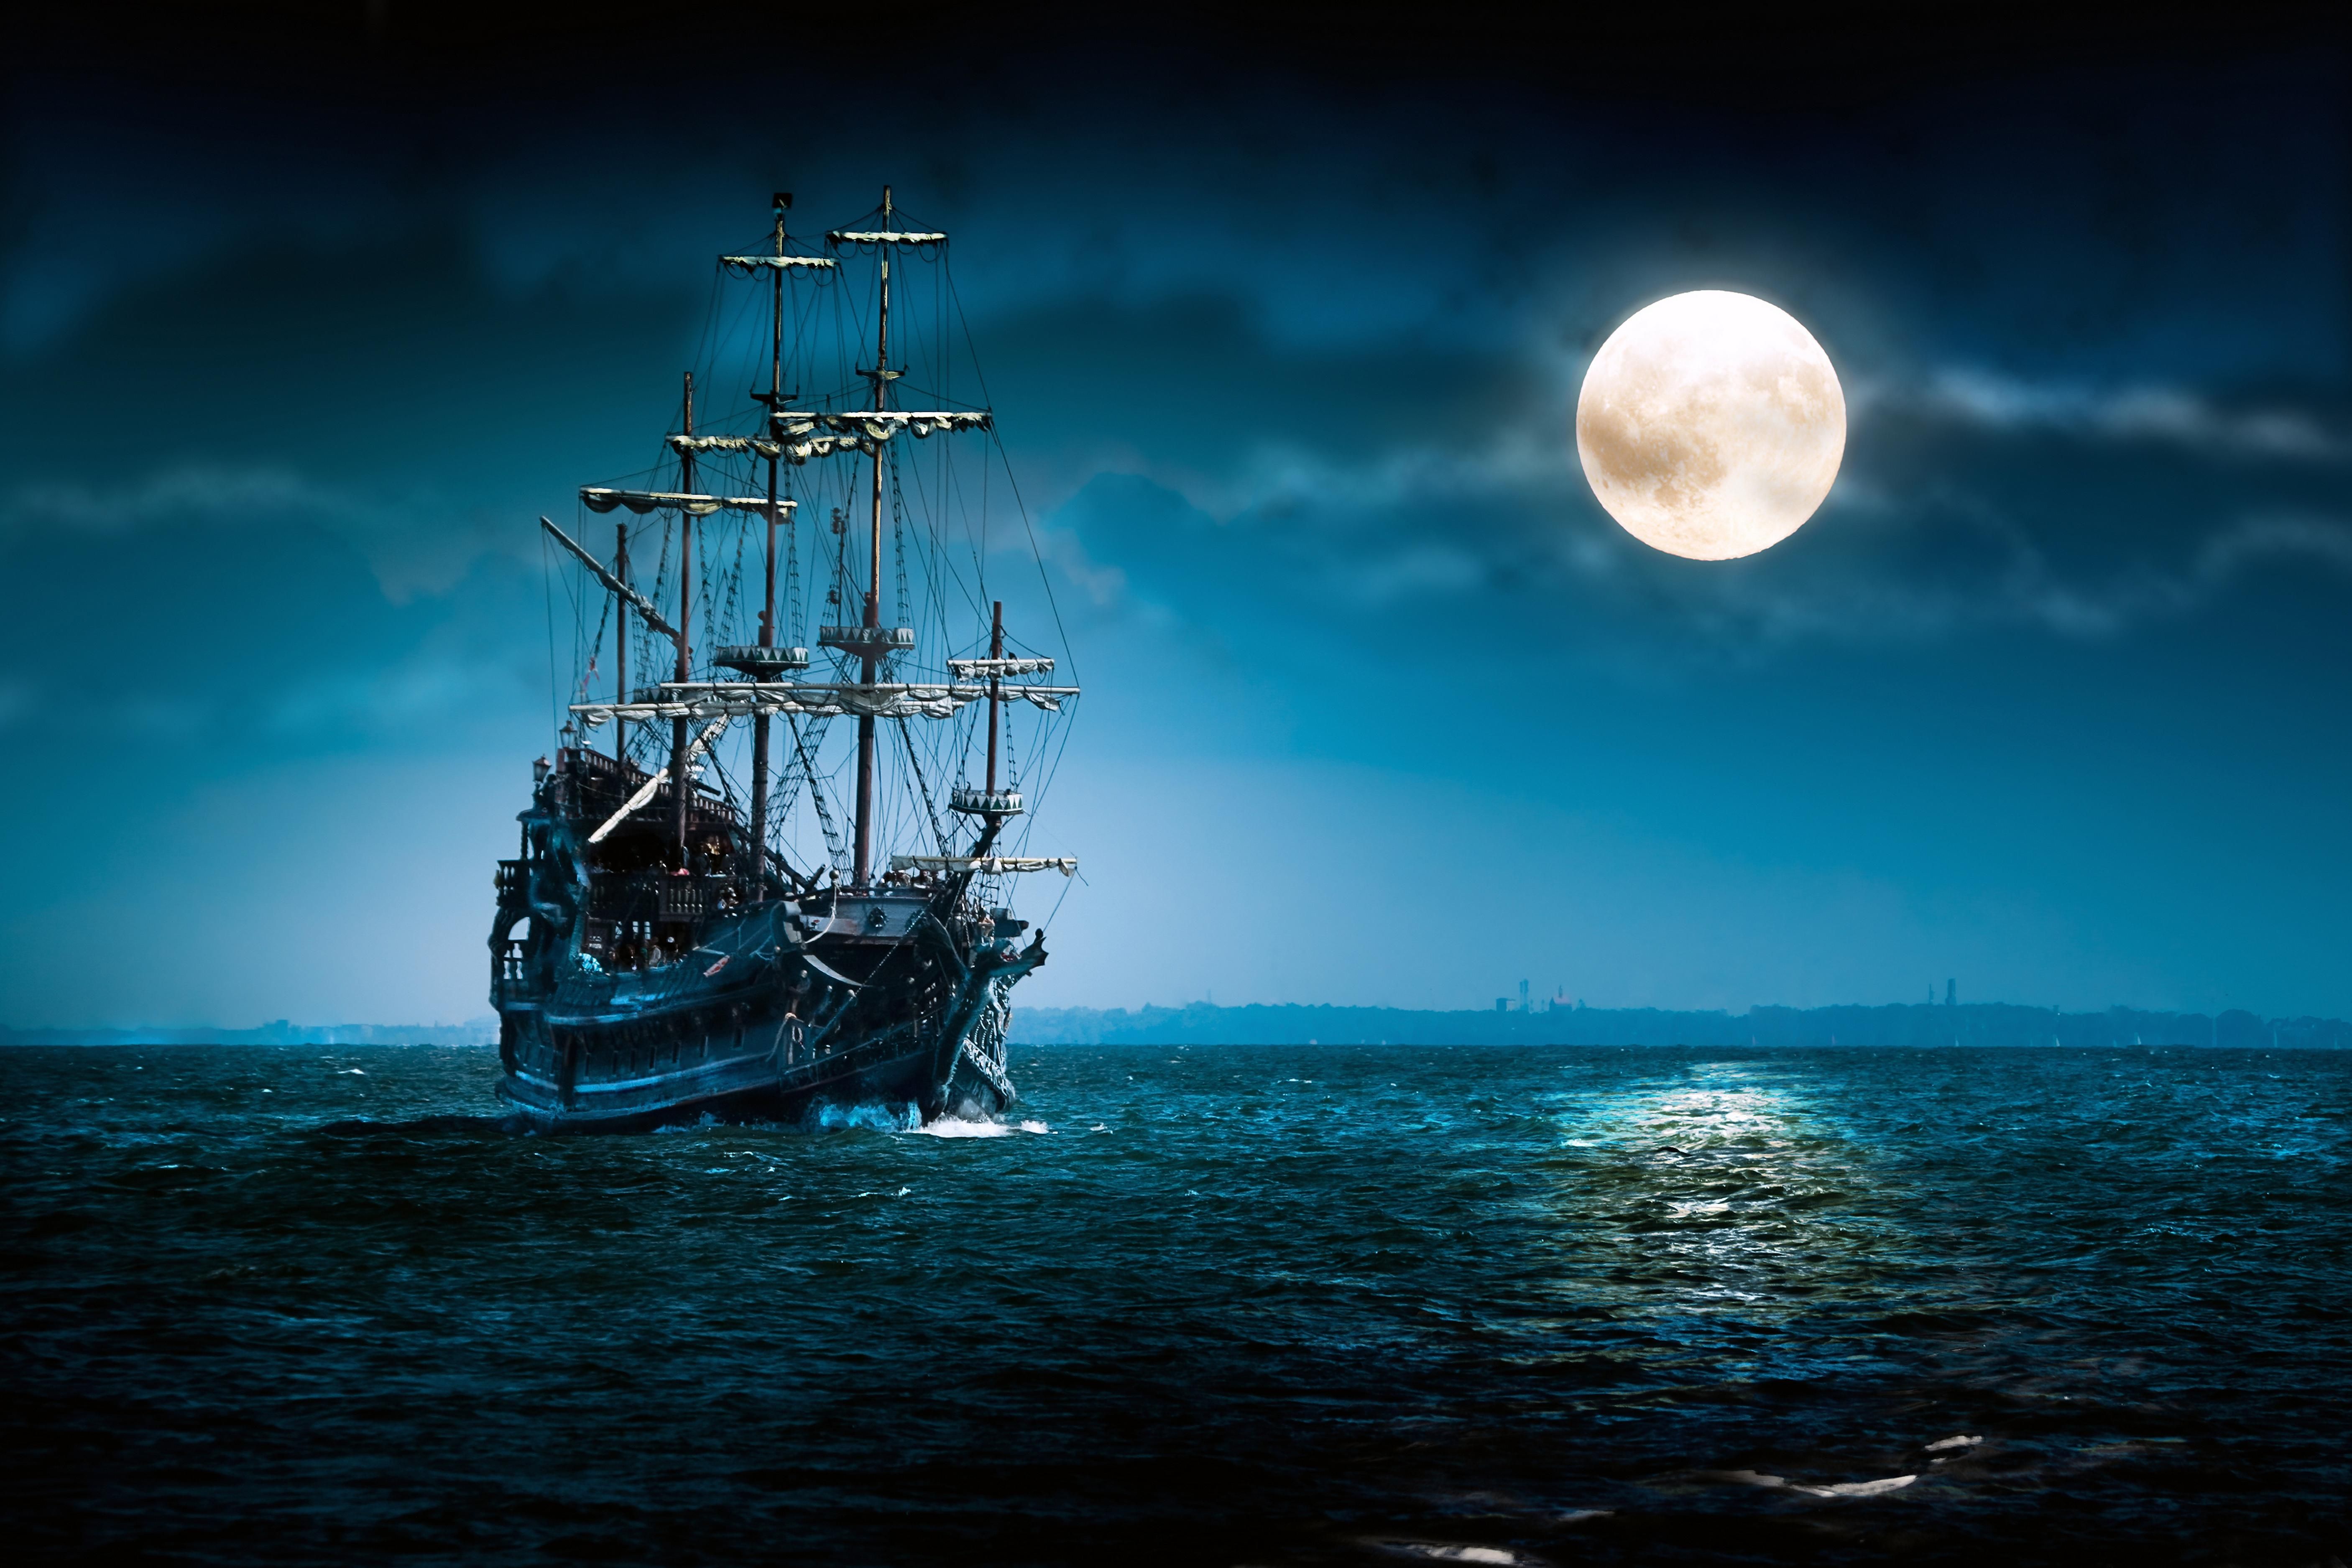 Download Pirate Ship Wallpaper Widescreen #y0rrl » hdxwallpaperz.com